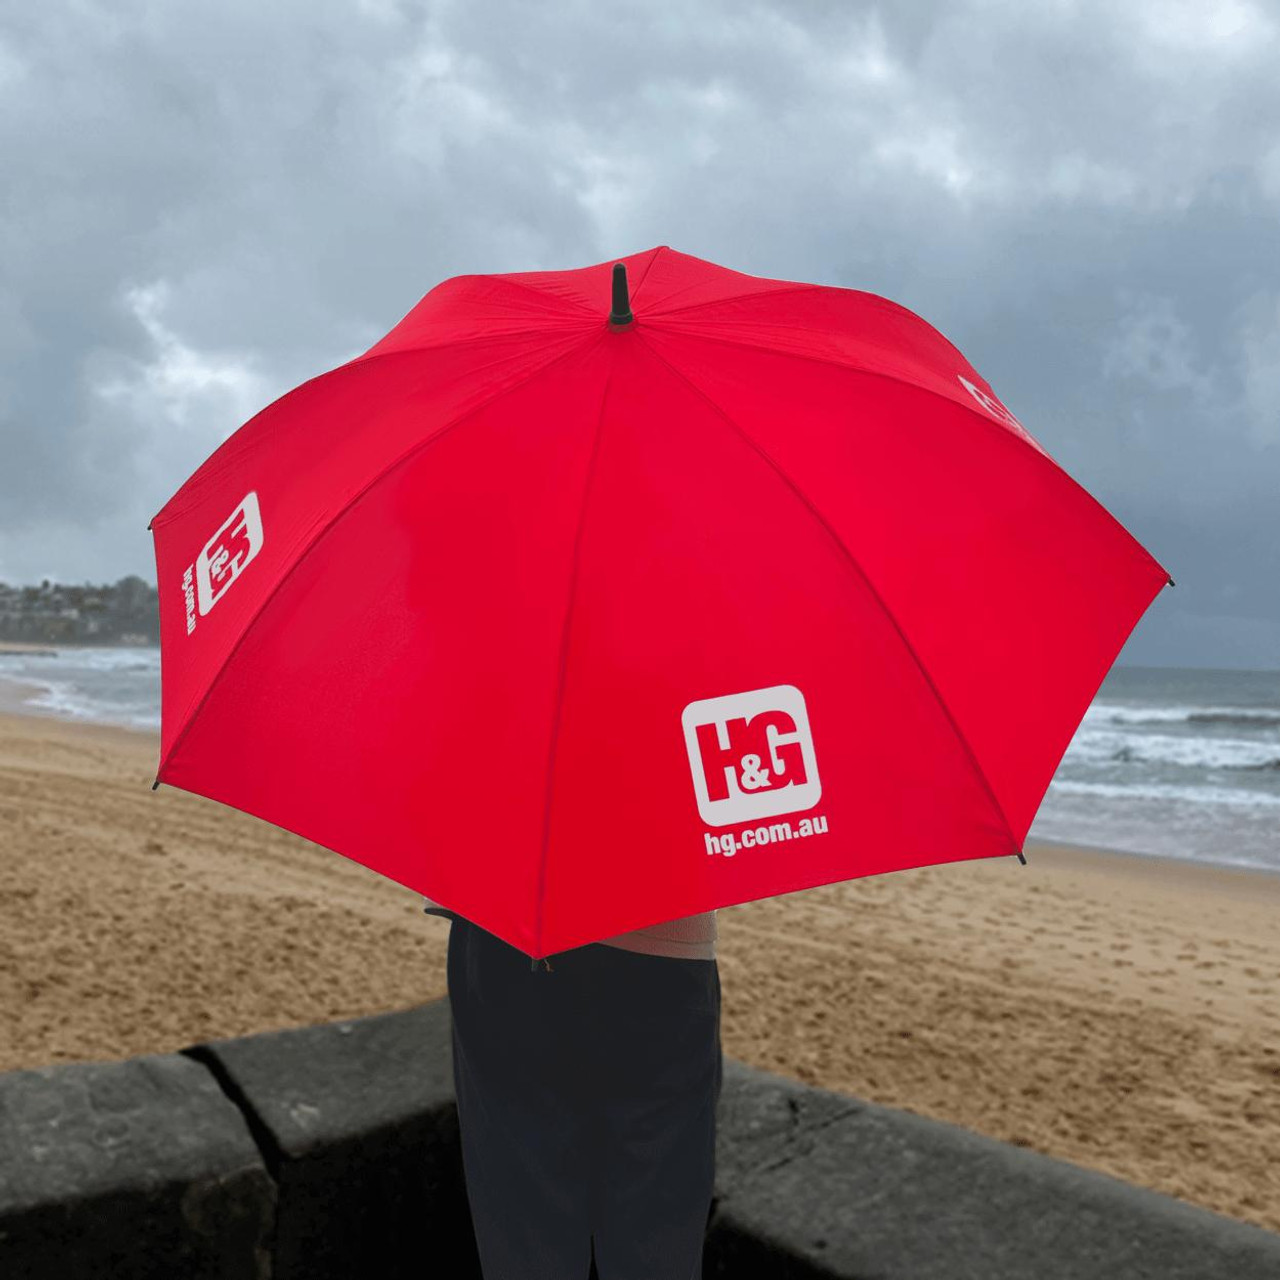  H&G Umbrella, for 2 People 